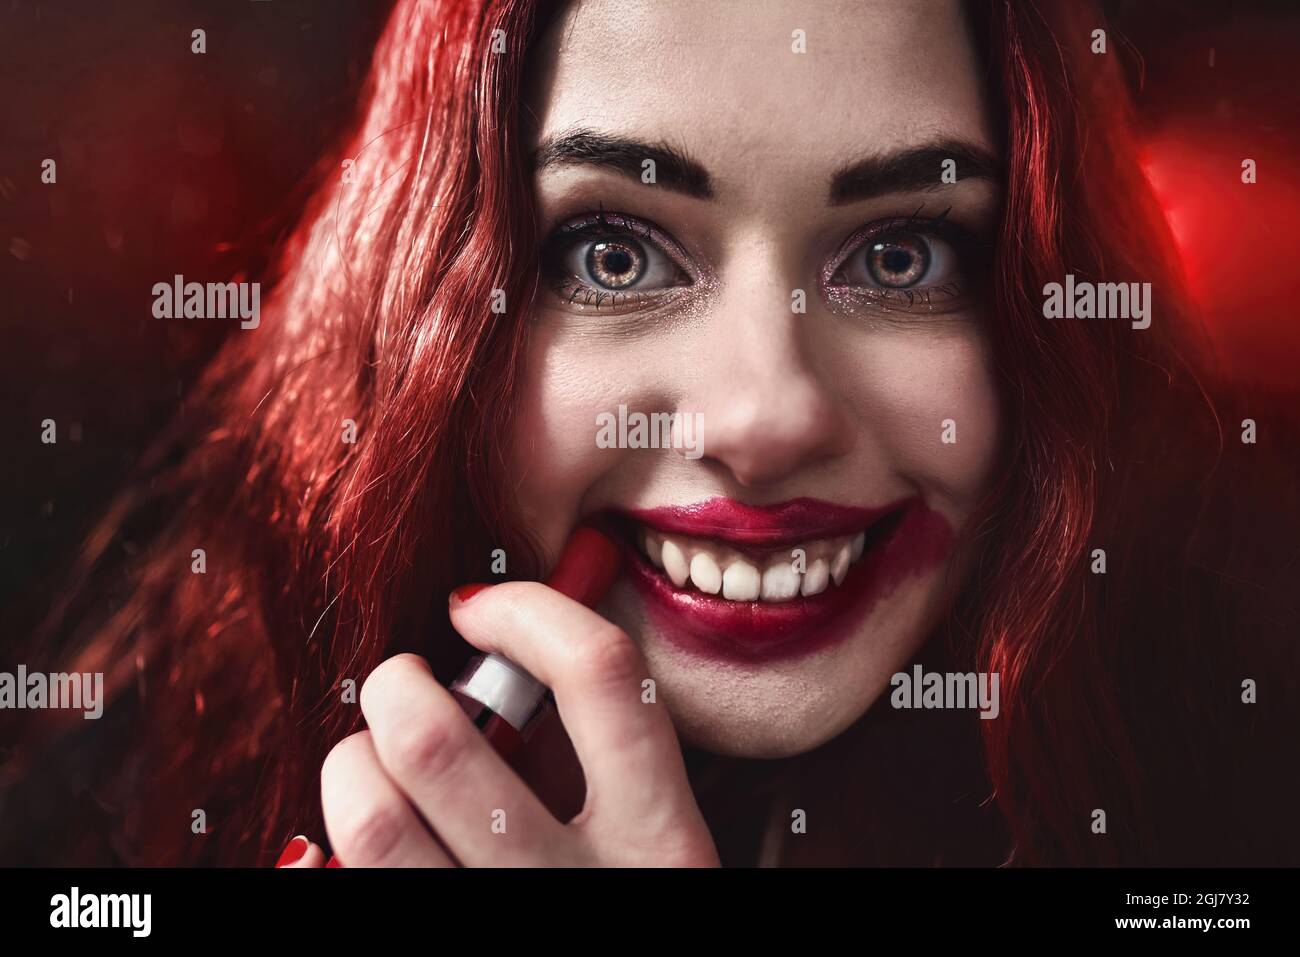 Halloween Time. Portrait of crazy-looking horror woman with red hair she is smearing red lipstick on her face, horror concept. Fear and nightmare Stock Photo